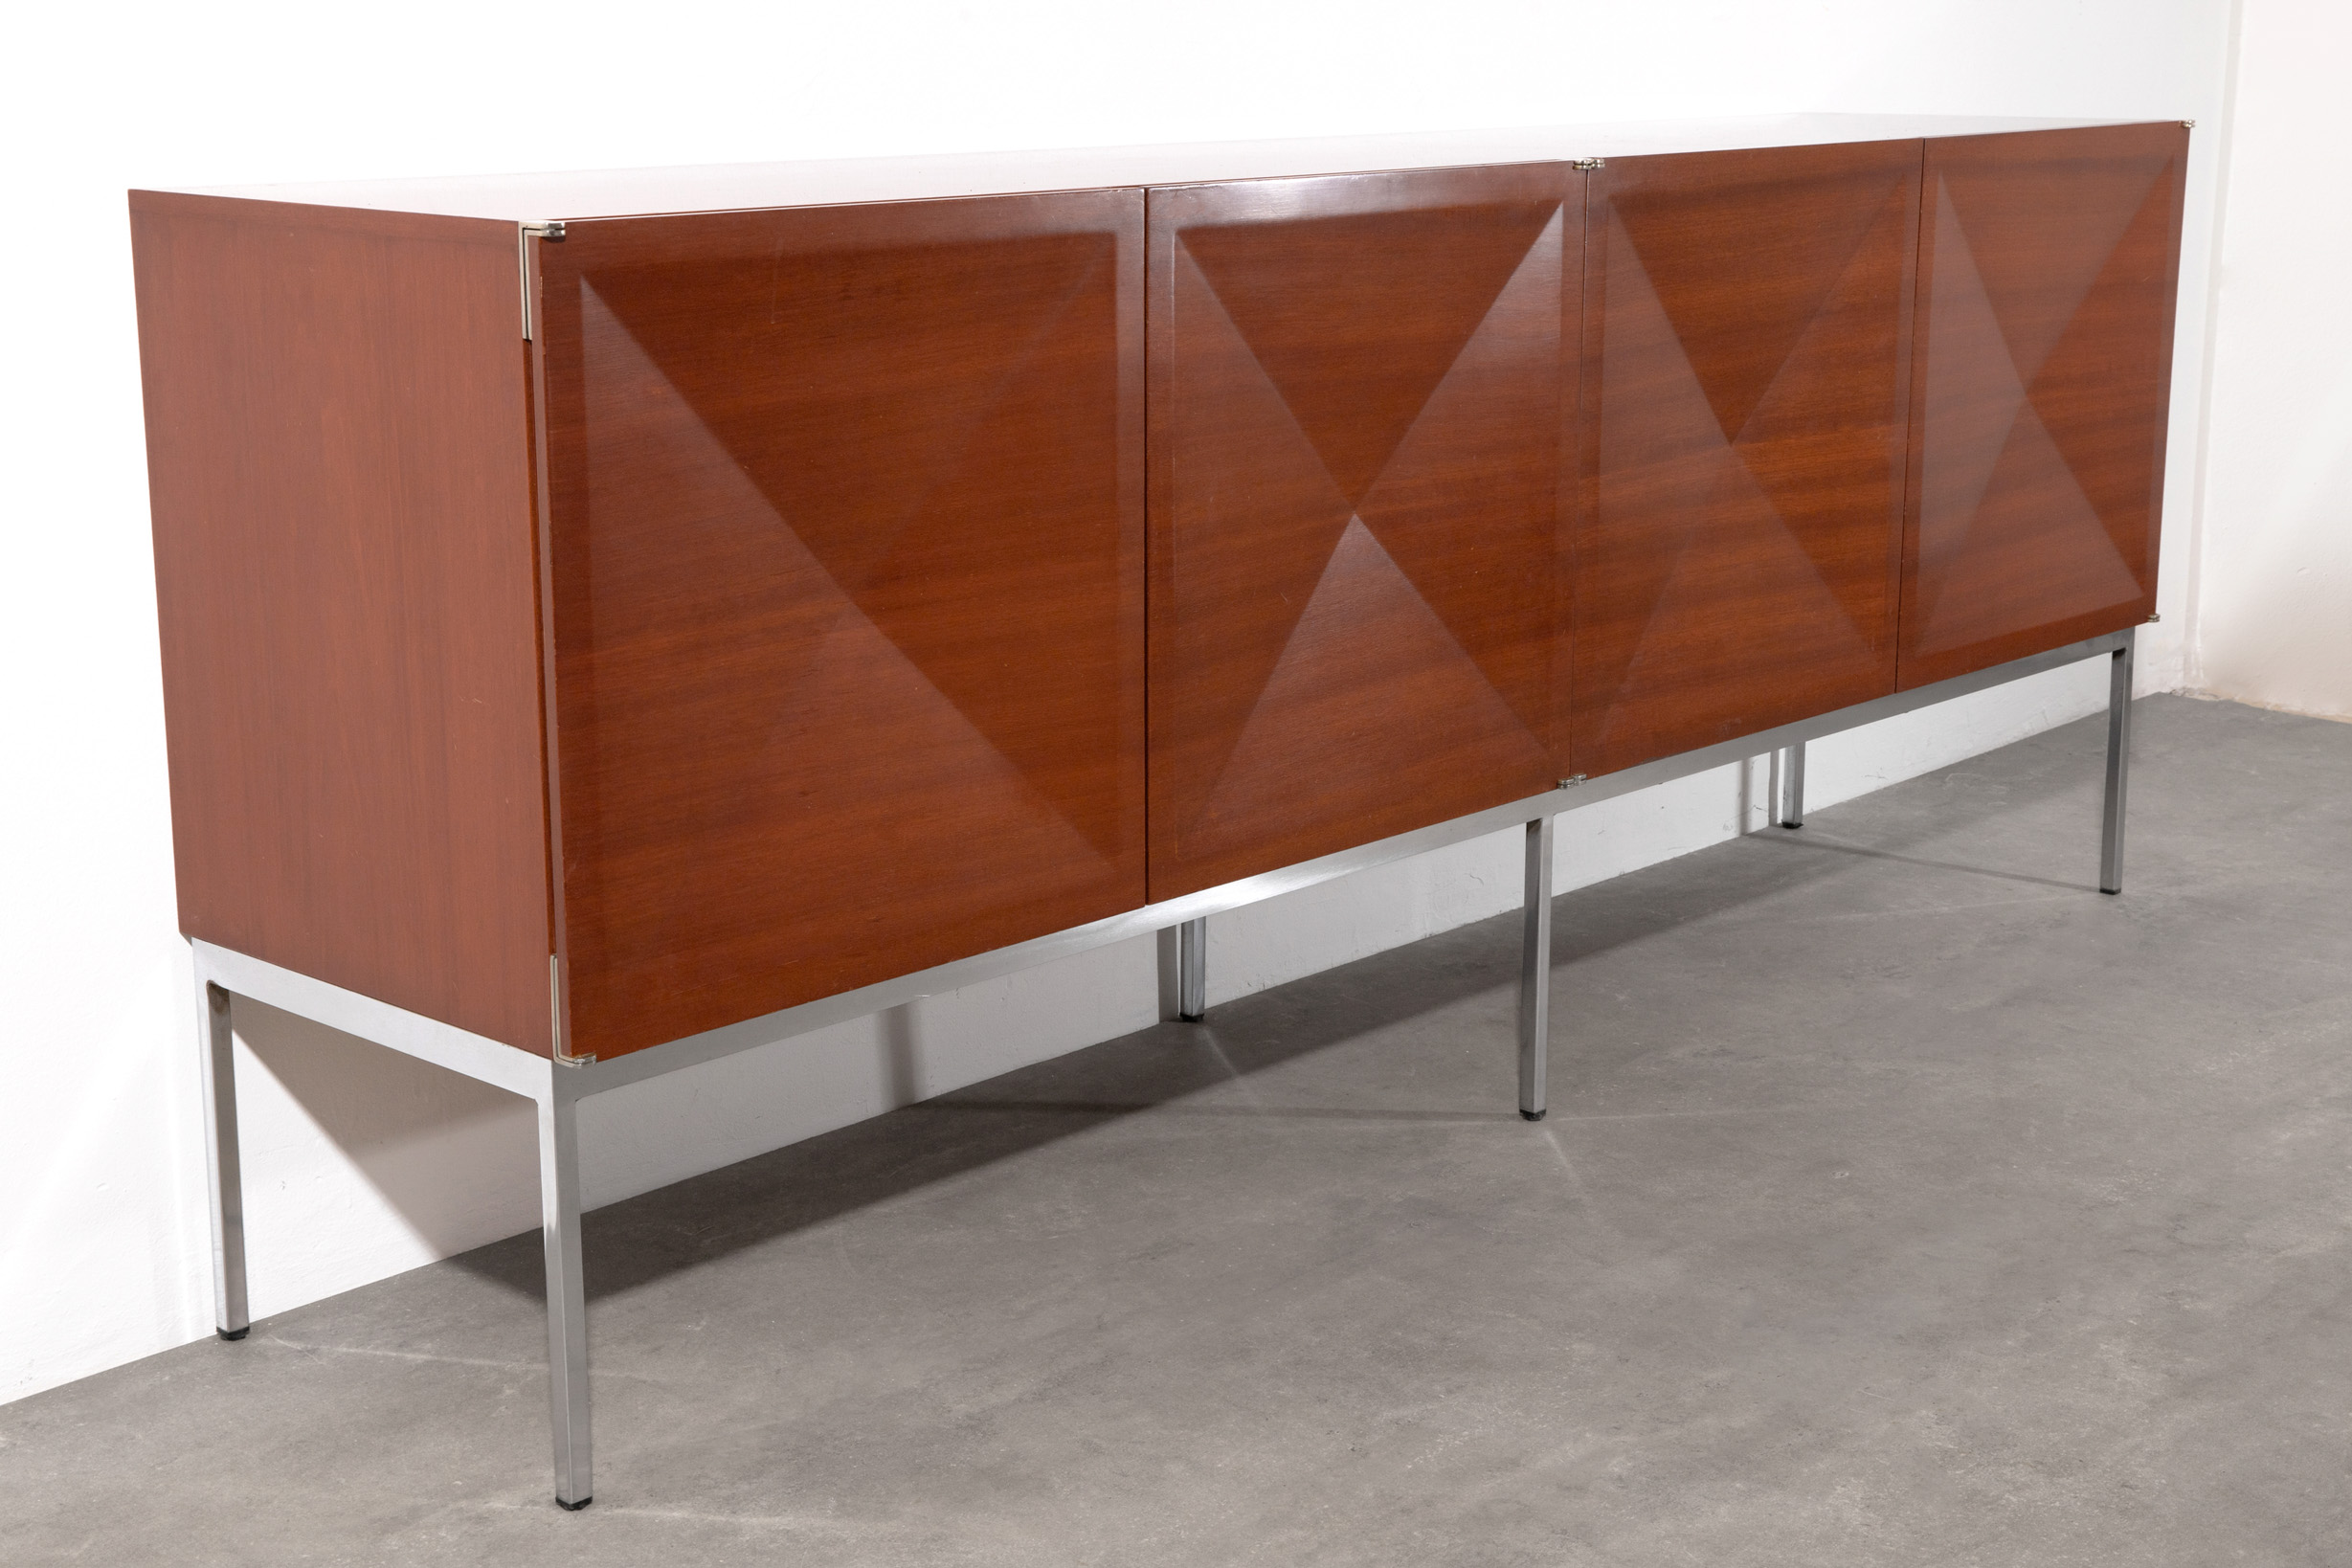 Philippon & Lecoq, Behr, Sideboard from the Diamond series